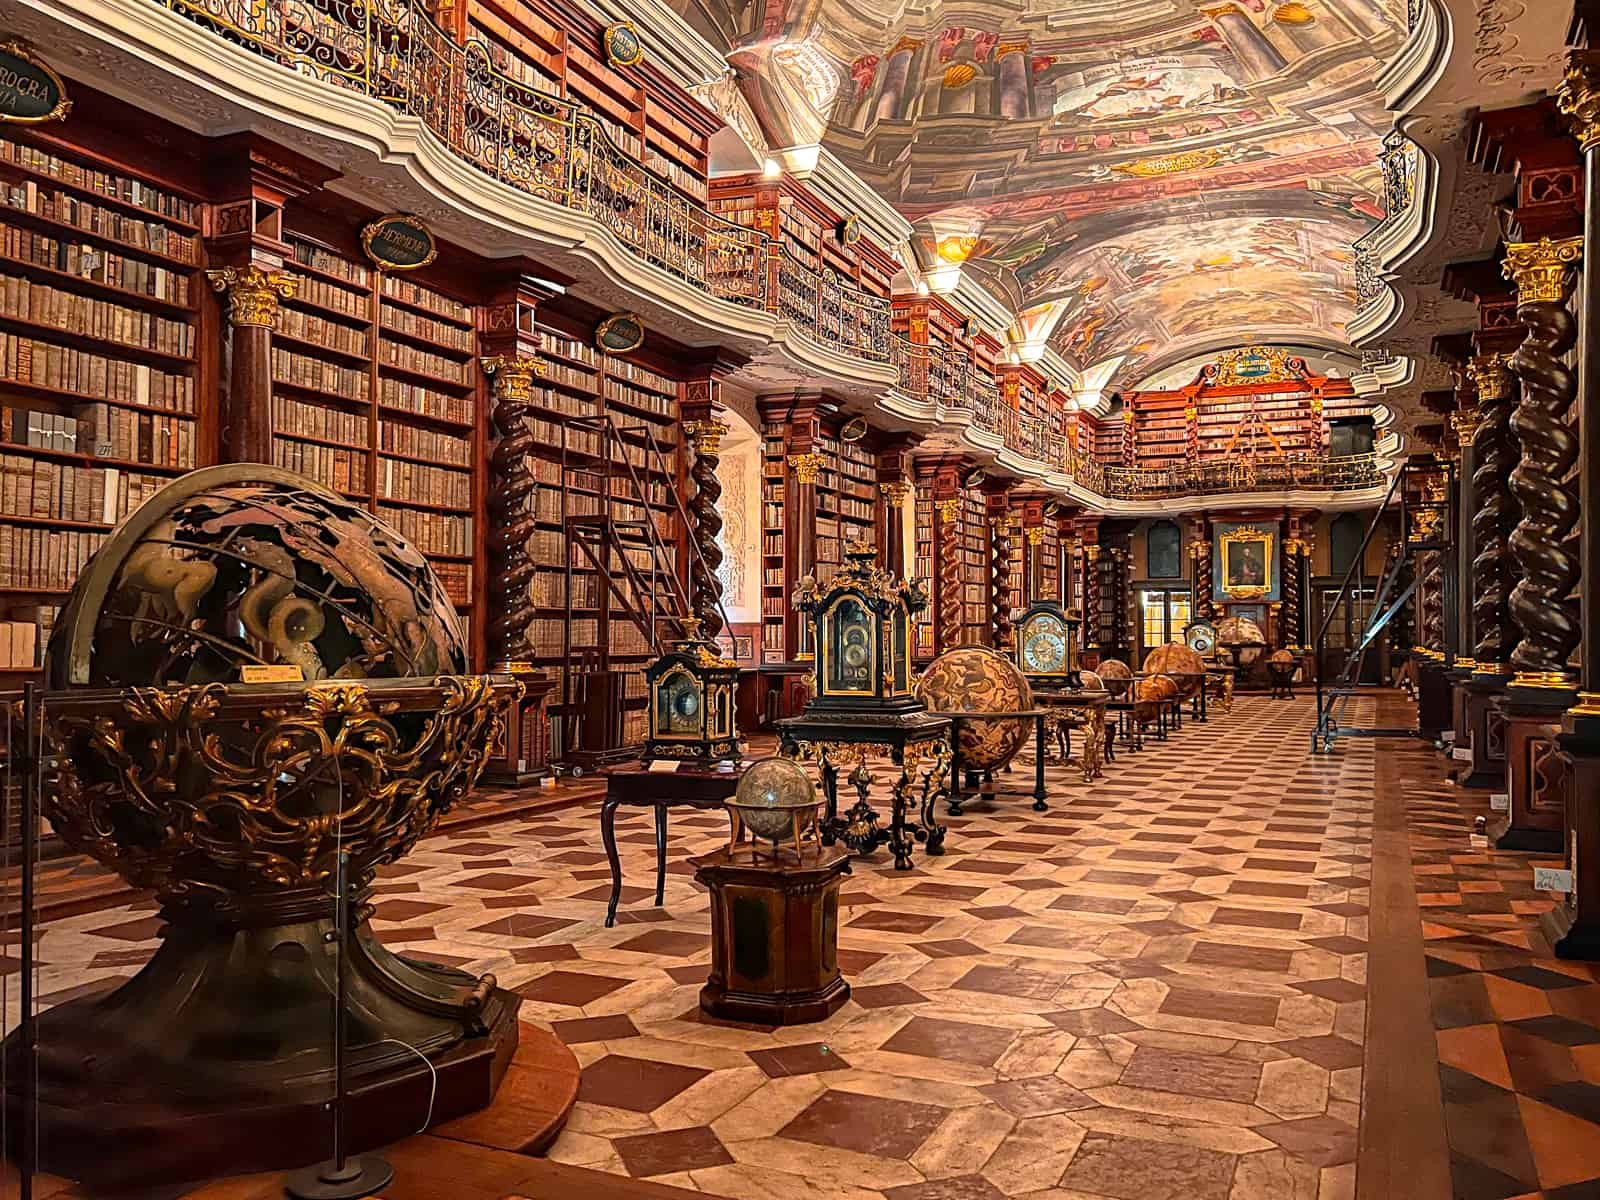 The Klementinum (Clementinum) National Library Prague (Source: WIkipedia)